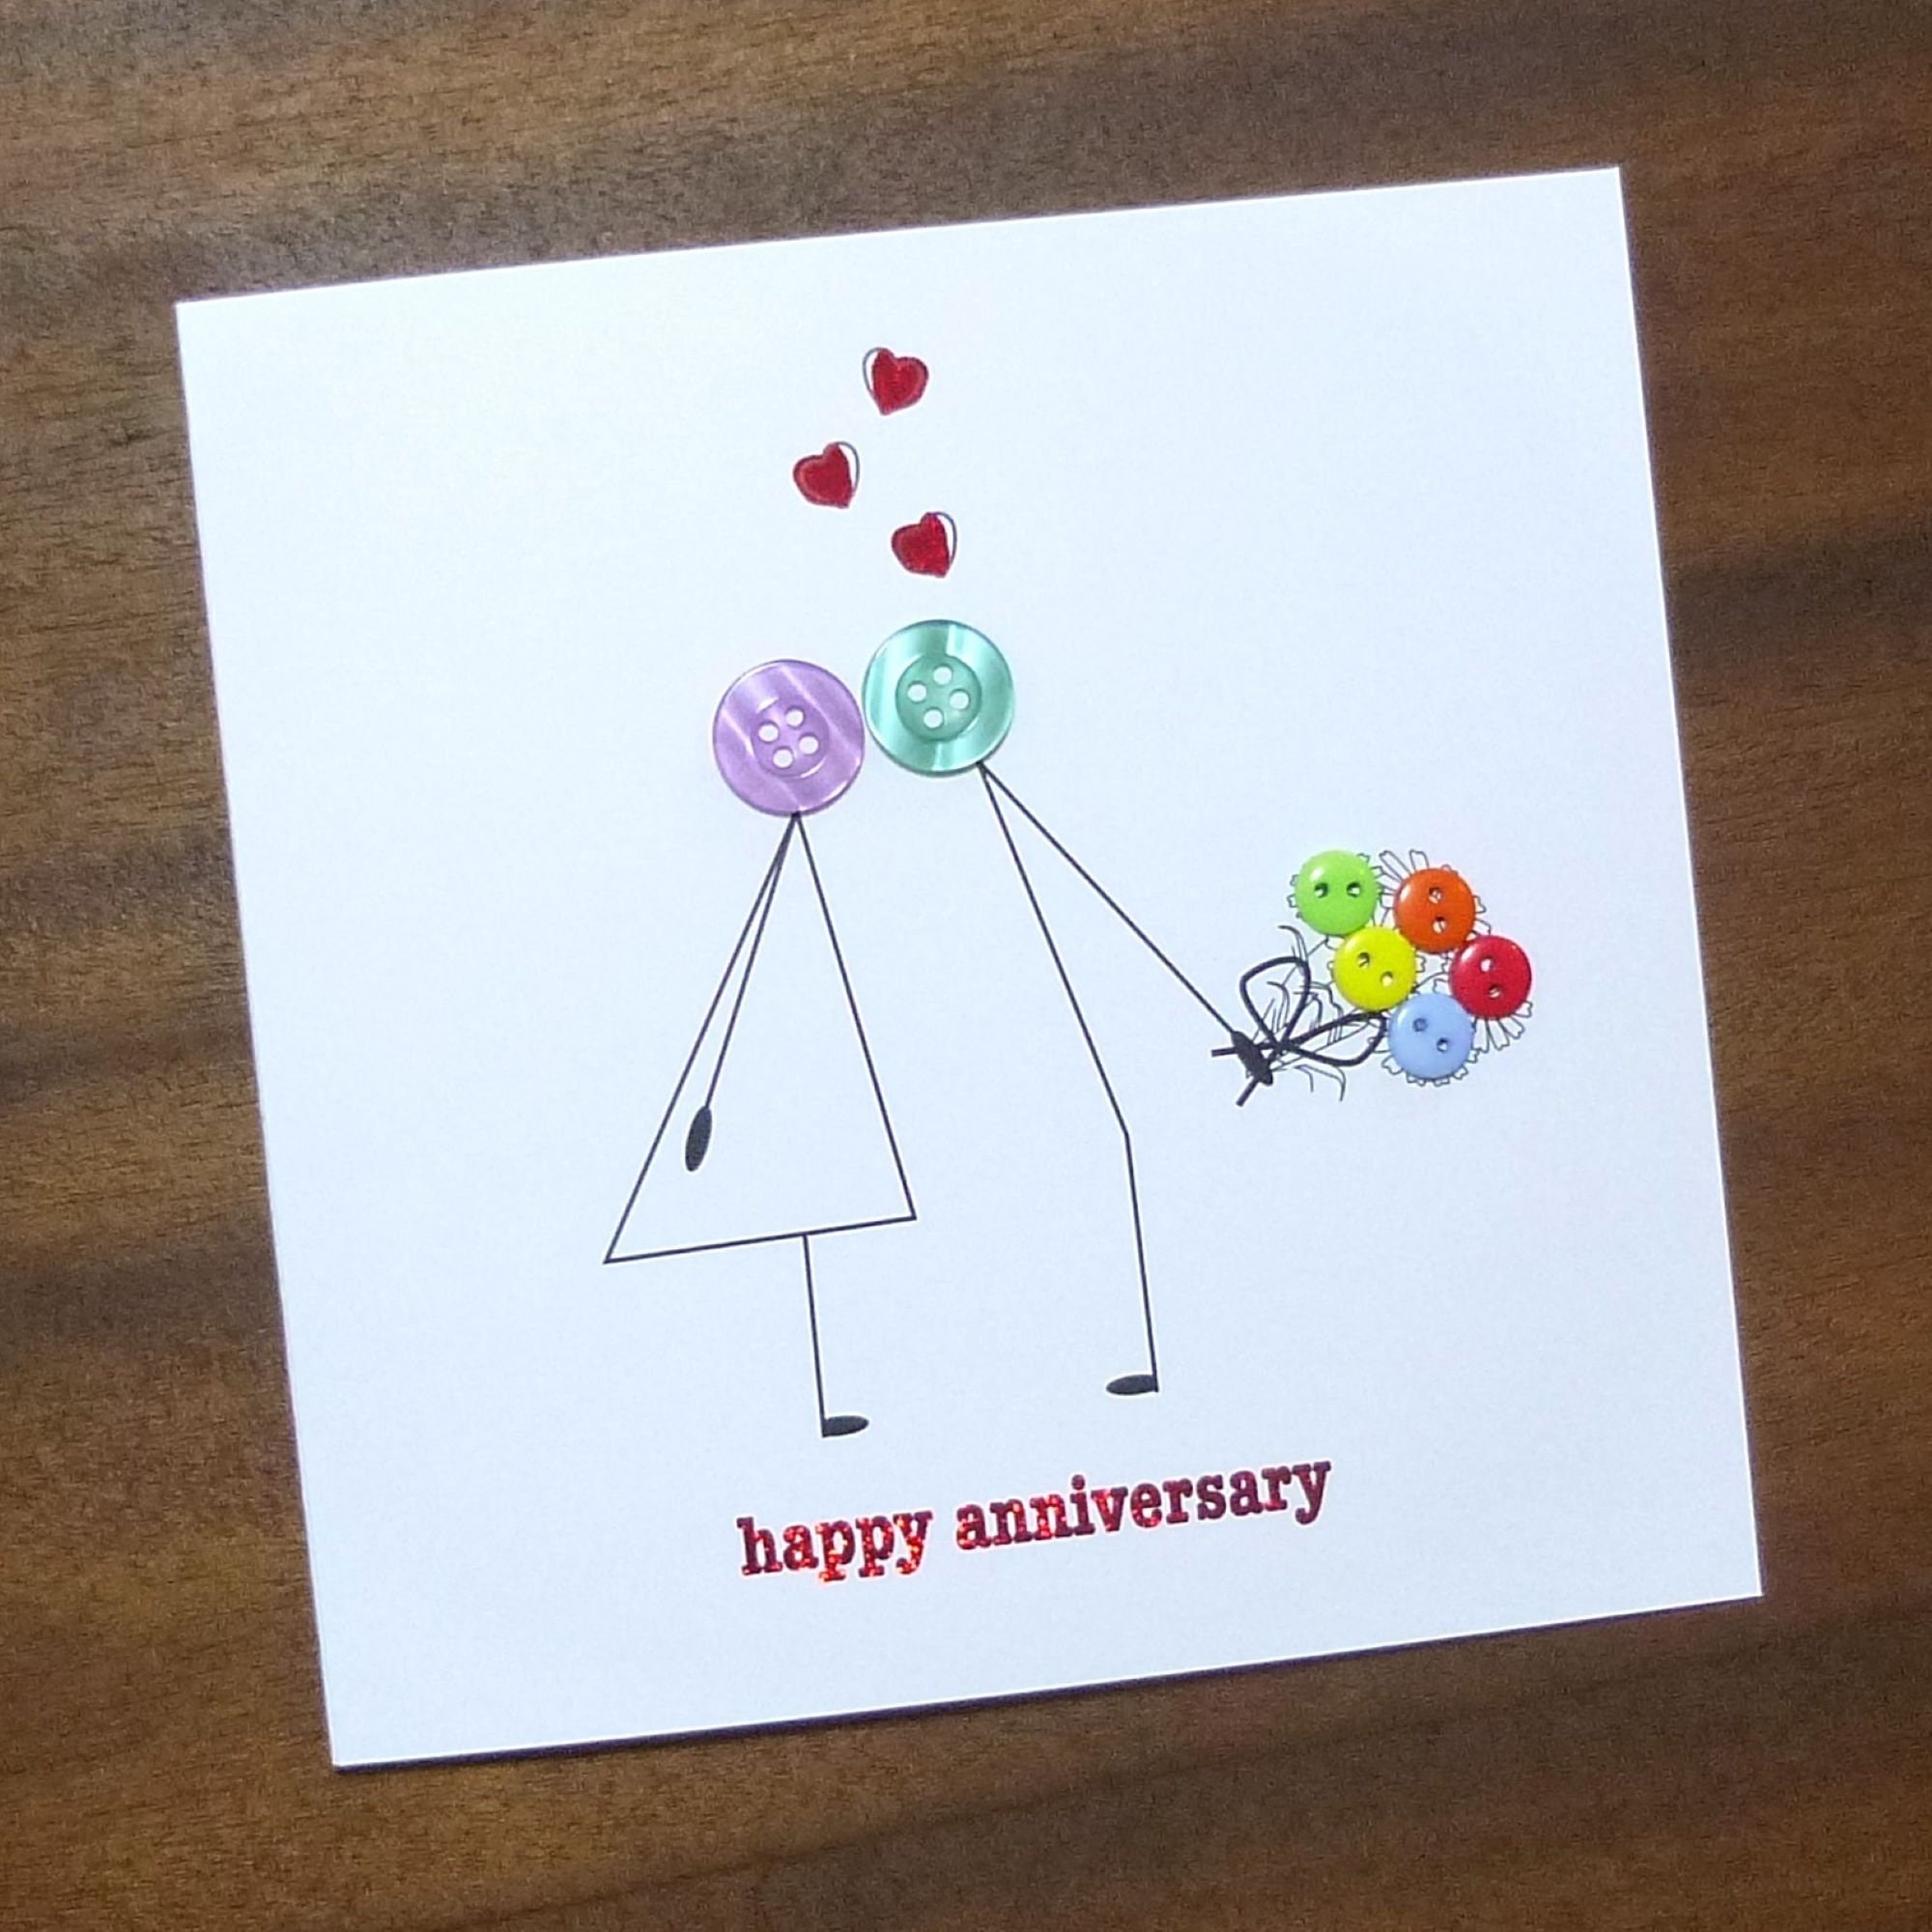 Happy Anniversary Card / Stick People Anniversary Greeting Card